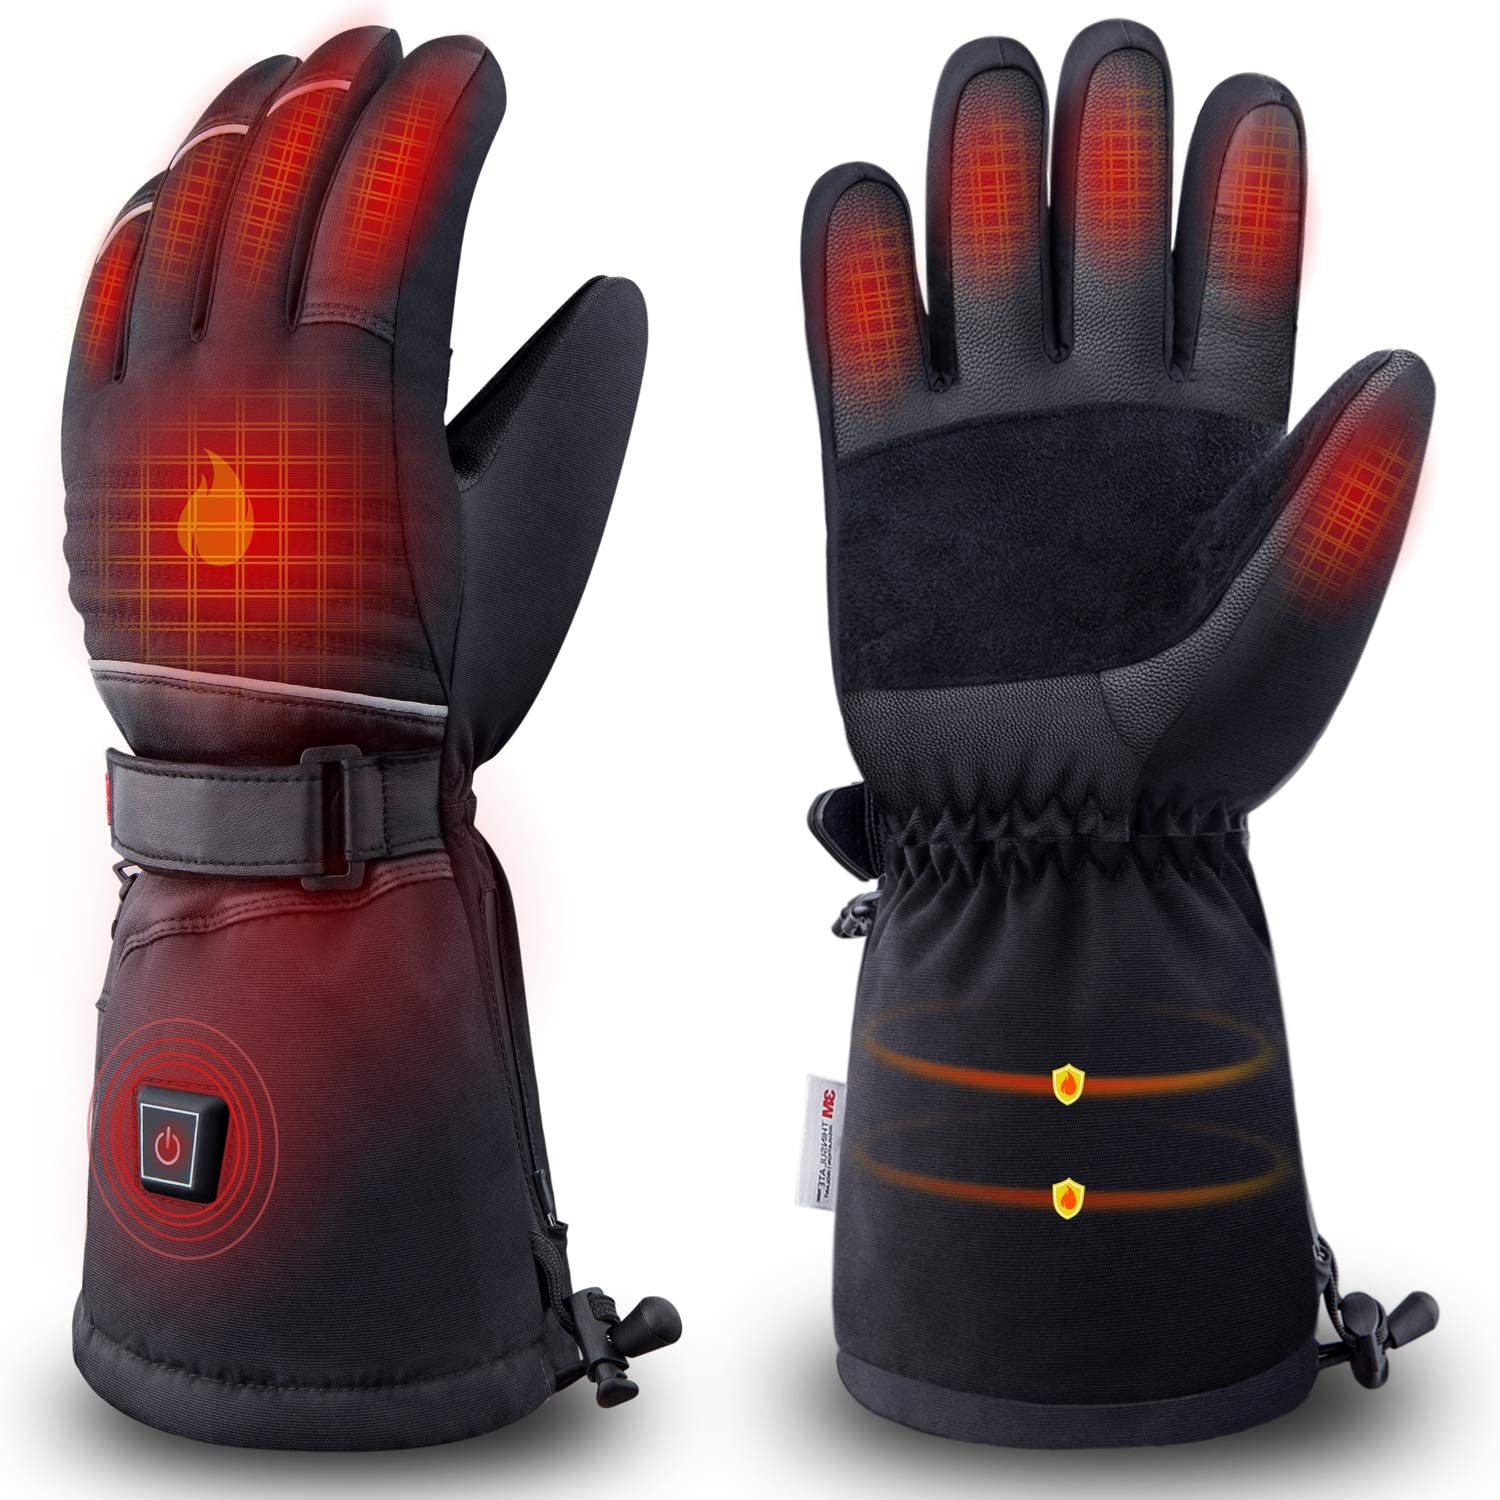 The Best Electric Heated Gloves in 2022 Reviews